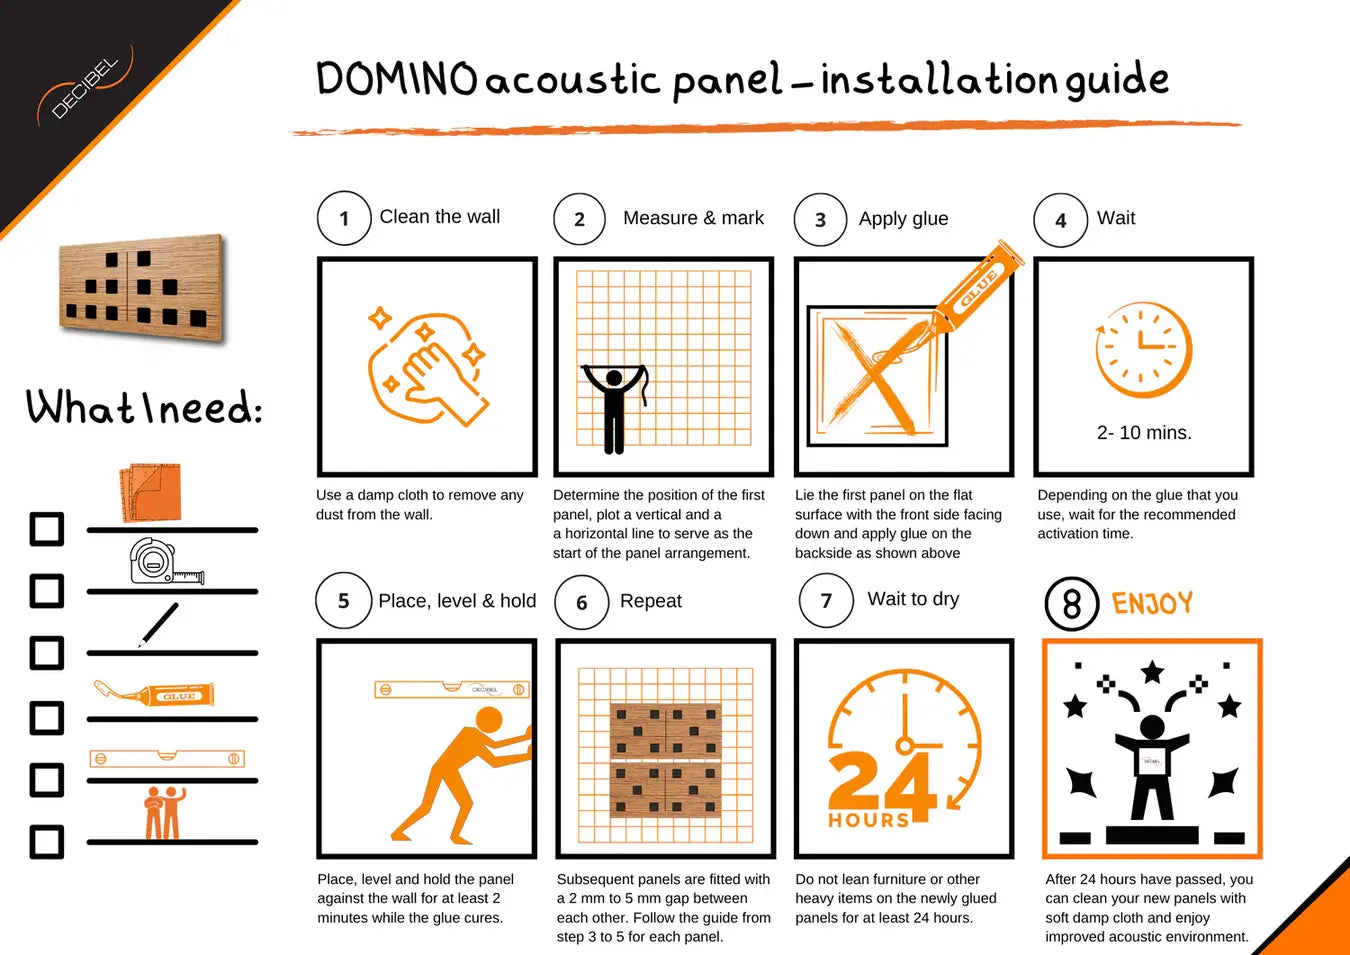 Wood acoustic sound absorbing panel DOMINO installation guide